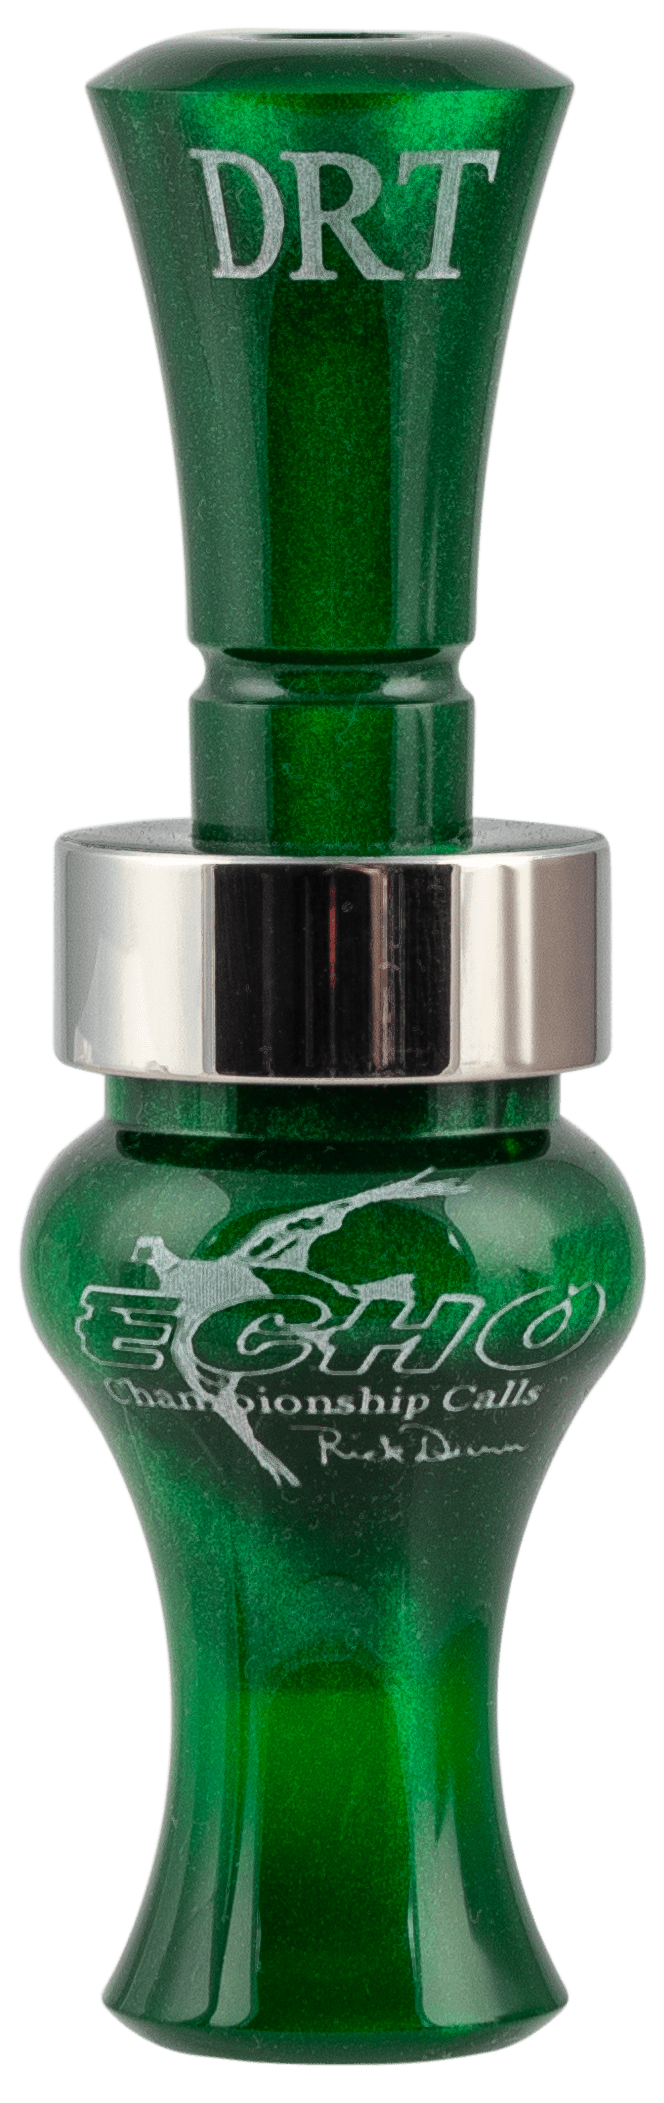 MO TACTICAL PRODUCTS LLC Mo Tactical Products Llc Drt, Echo 79021 Drt Green Pearl Timber Double Reed Hunting